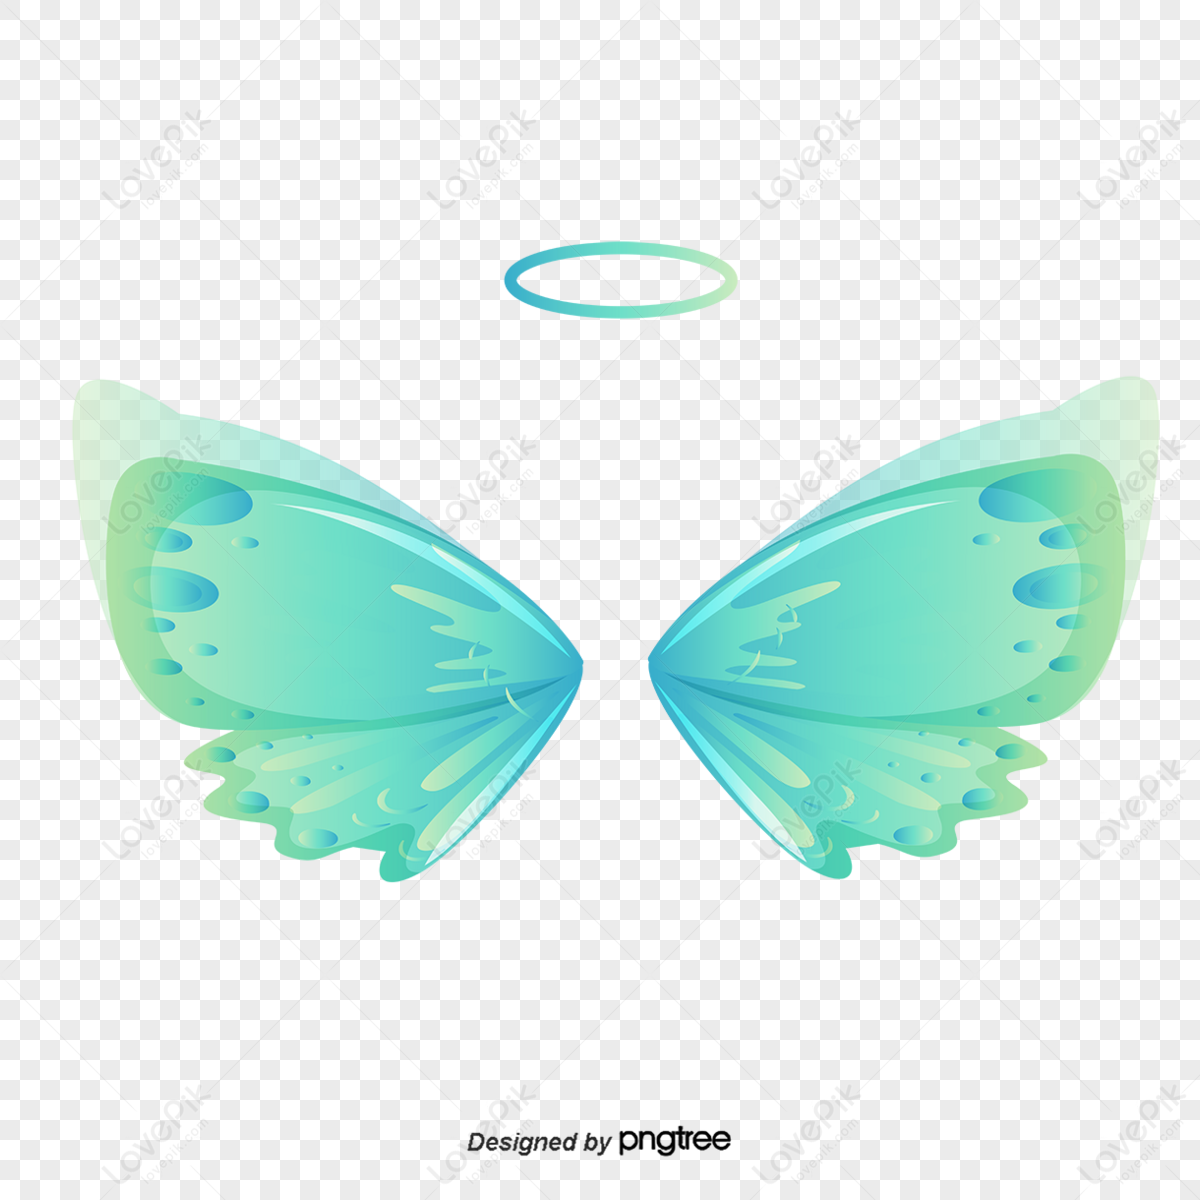 Pretty Angel Halo Png Free Download PNG Images, Angel Clipart, Angel, Aura PNG  Transparent Background - Pngtree | Angel halo, Halo drawings, Halo